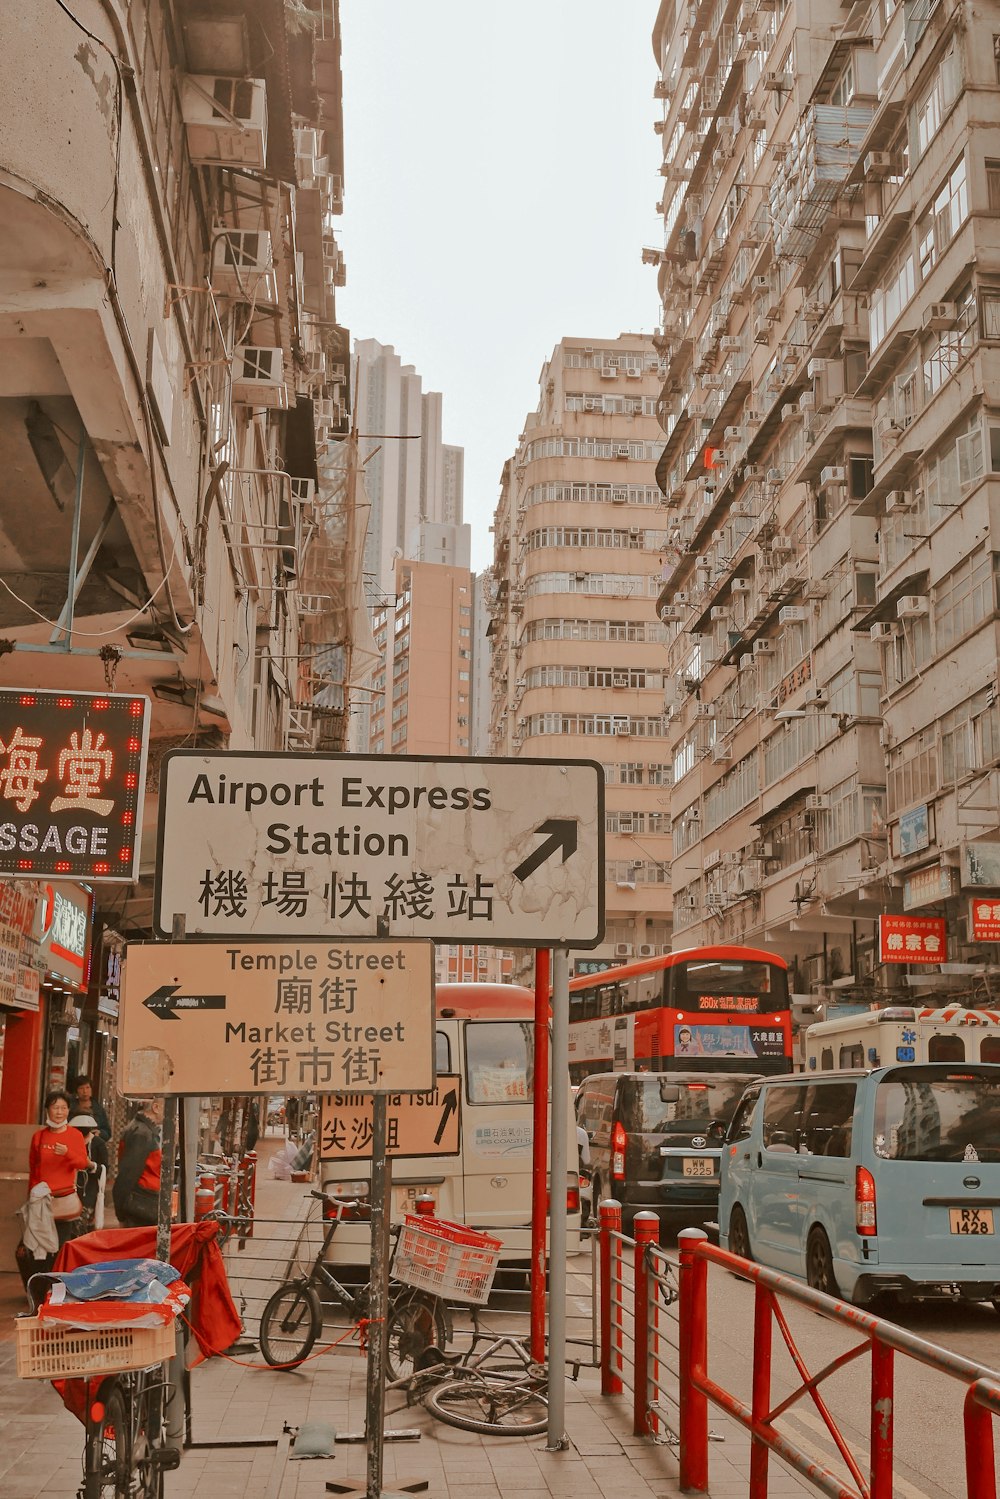 an airport express station sign on a city street